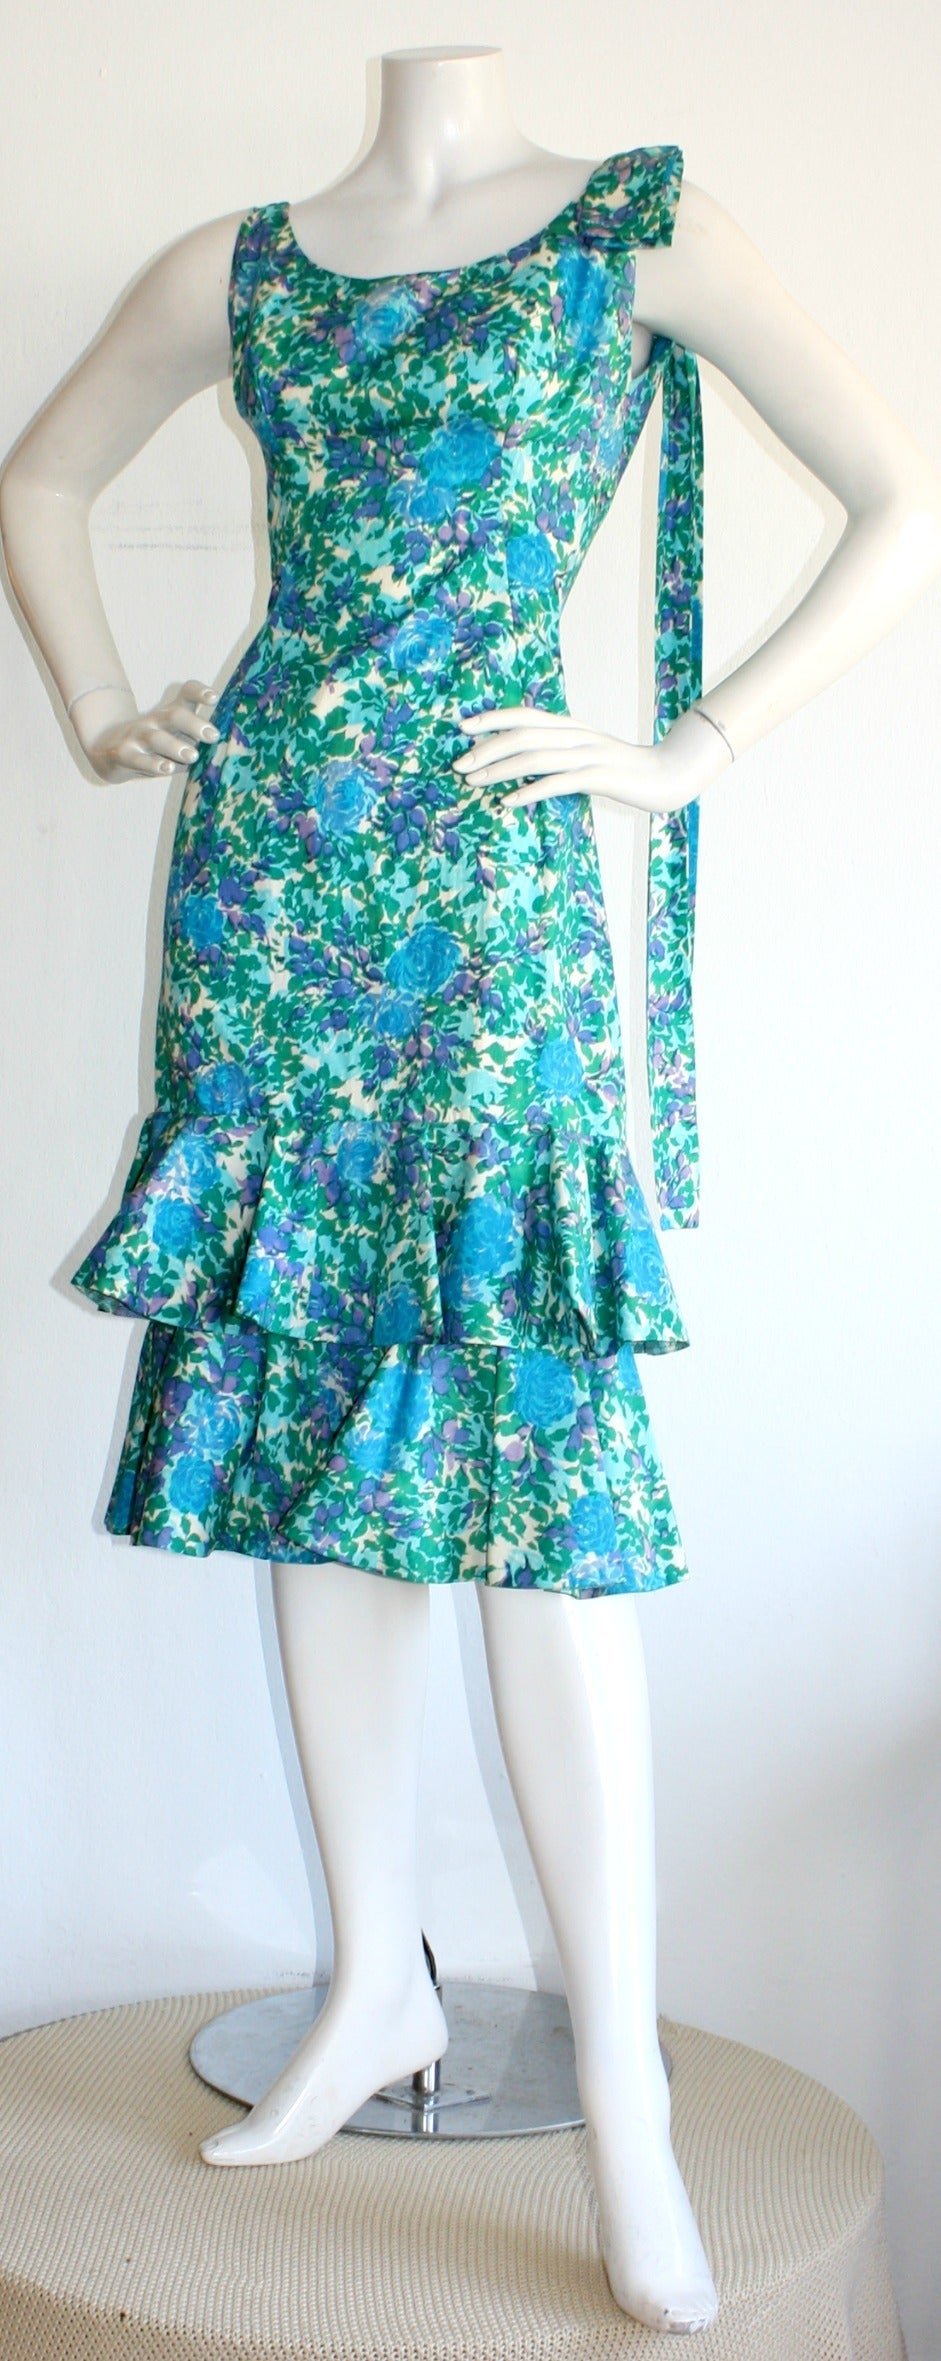 Stunning vintage bombshell 1950s Neiman Marcus peplum dress!!! Vibrant blue and green watercolor print. Peplum lined with crinoline. In great condition. Approximately Size Small - Small Medium

Measurements:
34- 36 inch bust
26 inch waist
36 inch